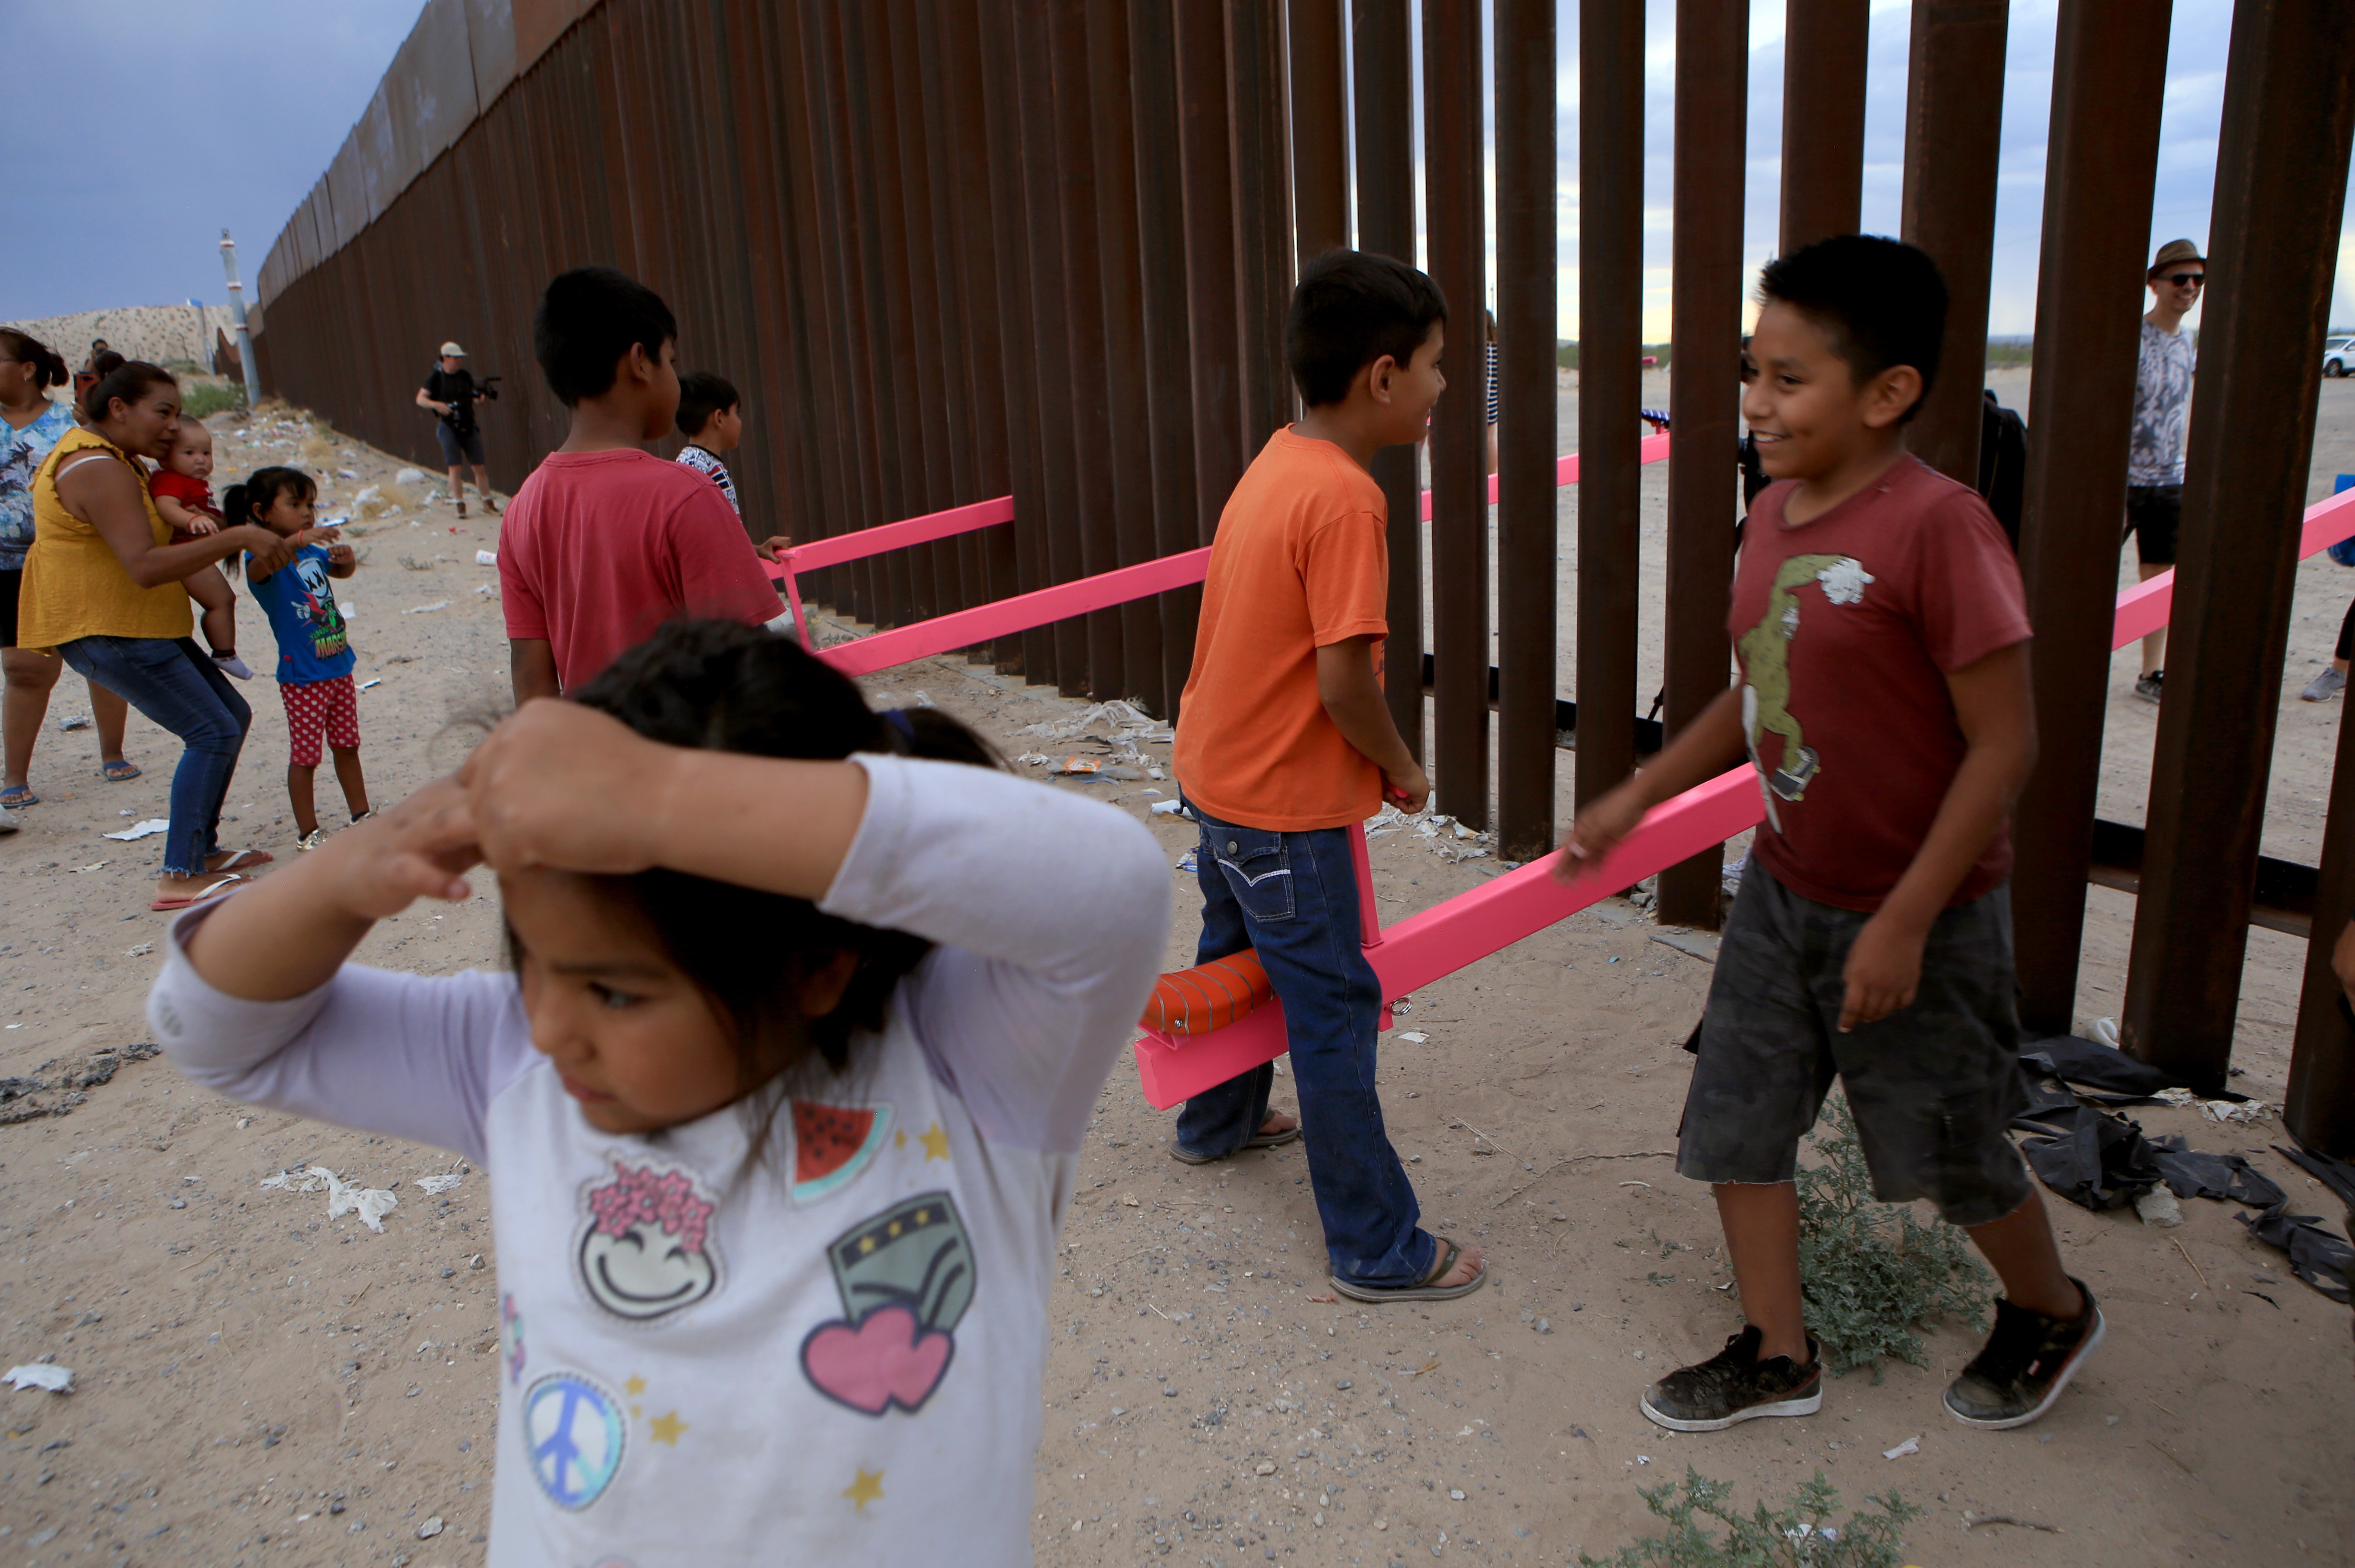 American and Mexican families play with a see-saw installation at the border near Ciudad Juarez, Mexico, in July of 2019. The project has been recognized by a prestigious design award. Luis Torres/AFP via Getty Images